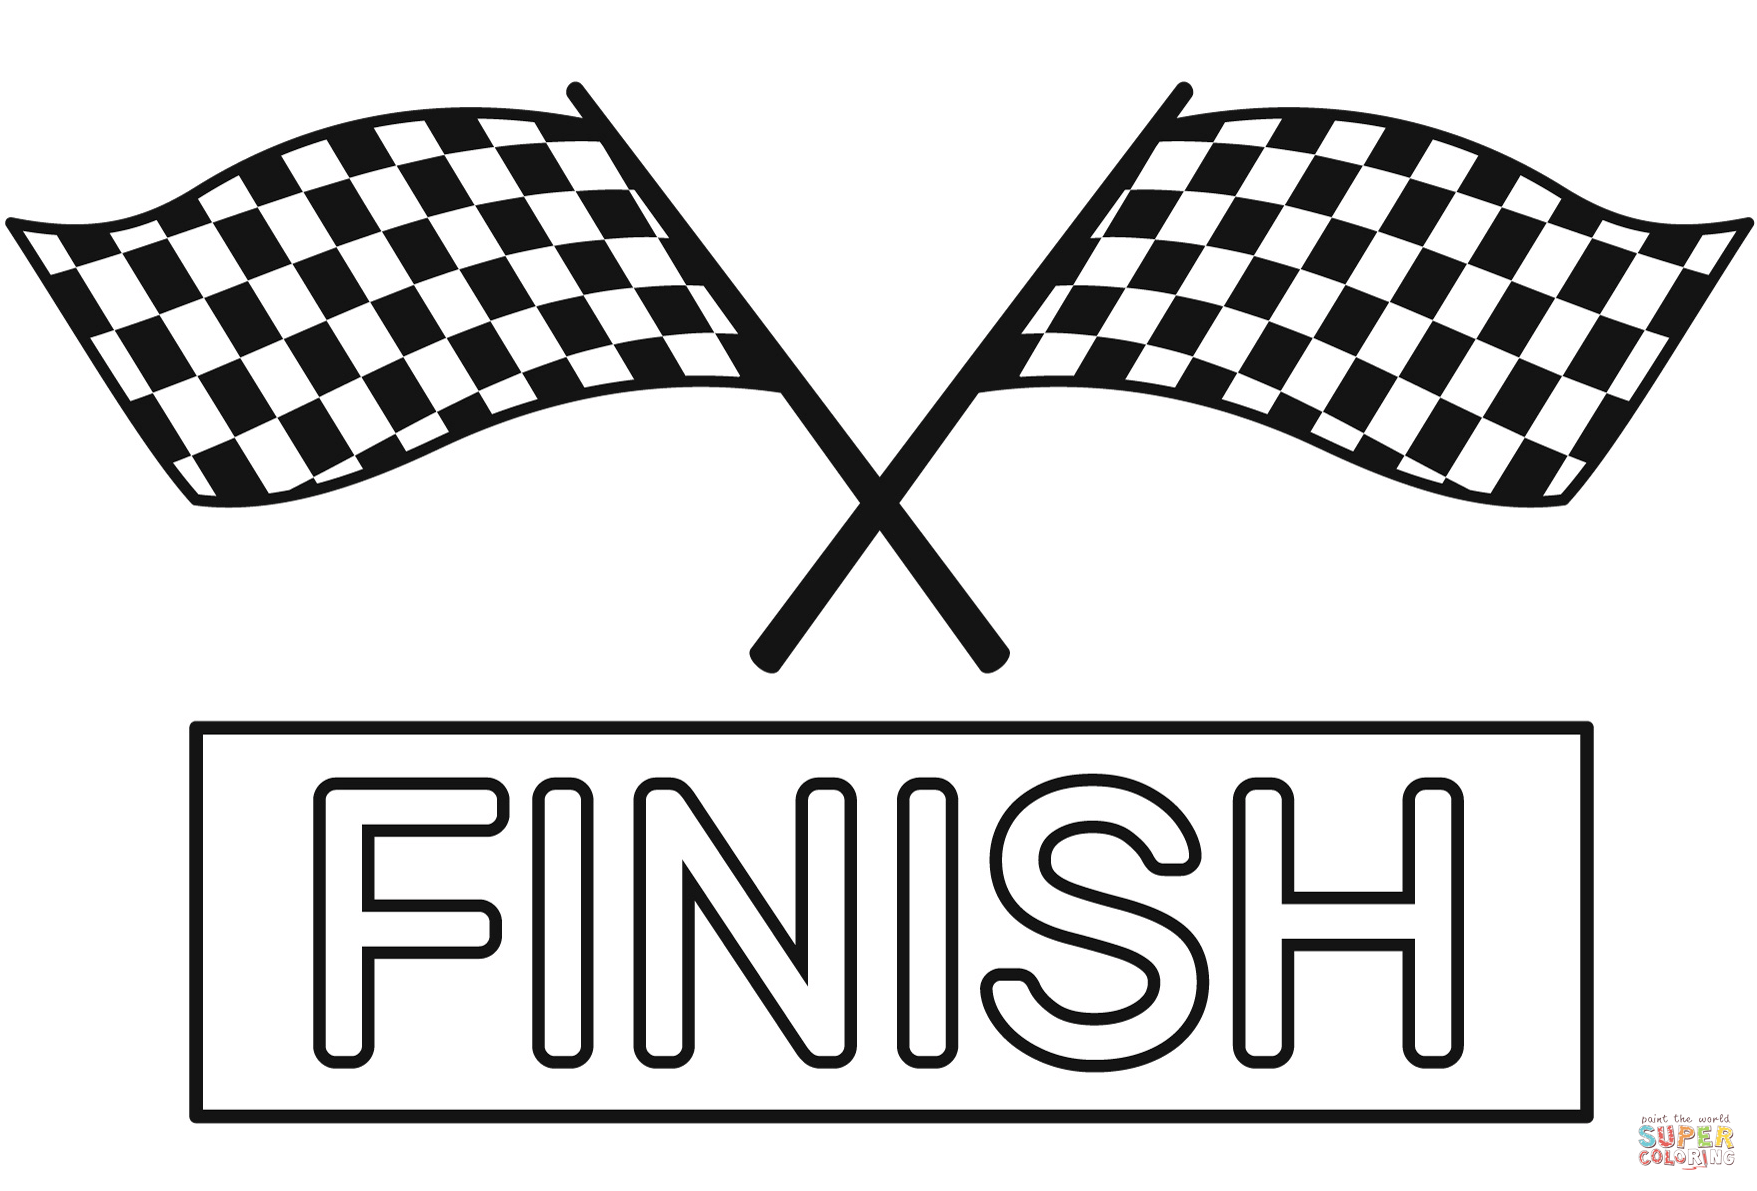 Finish line coloring page free printable coloring pages